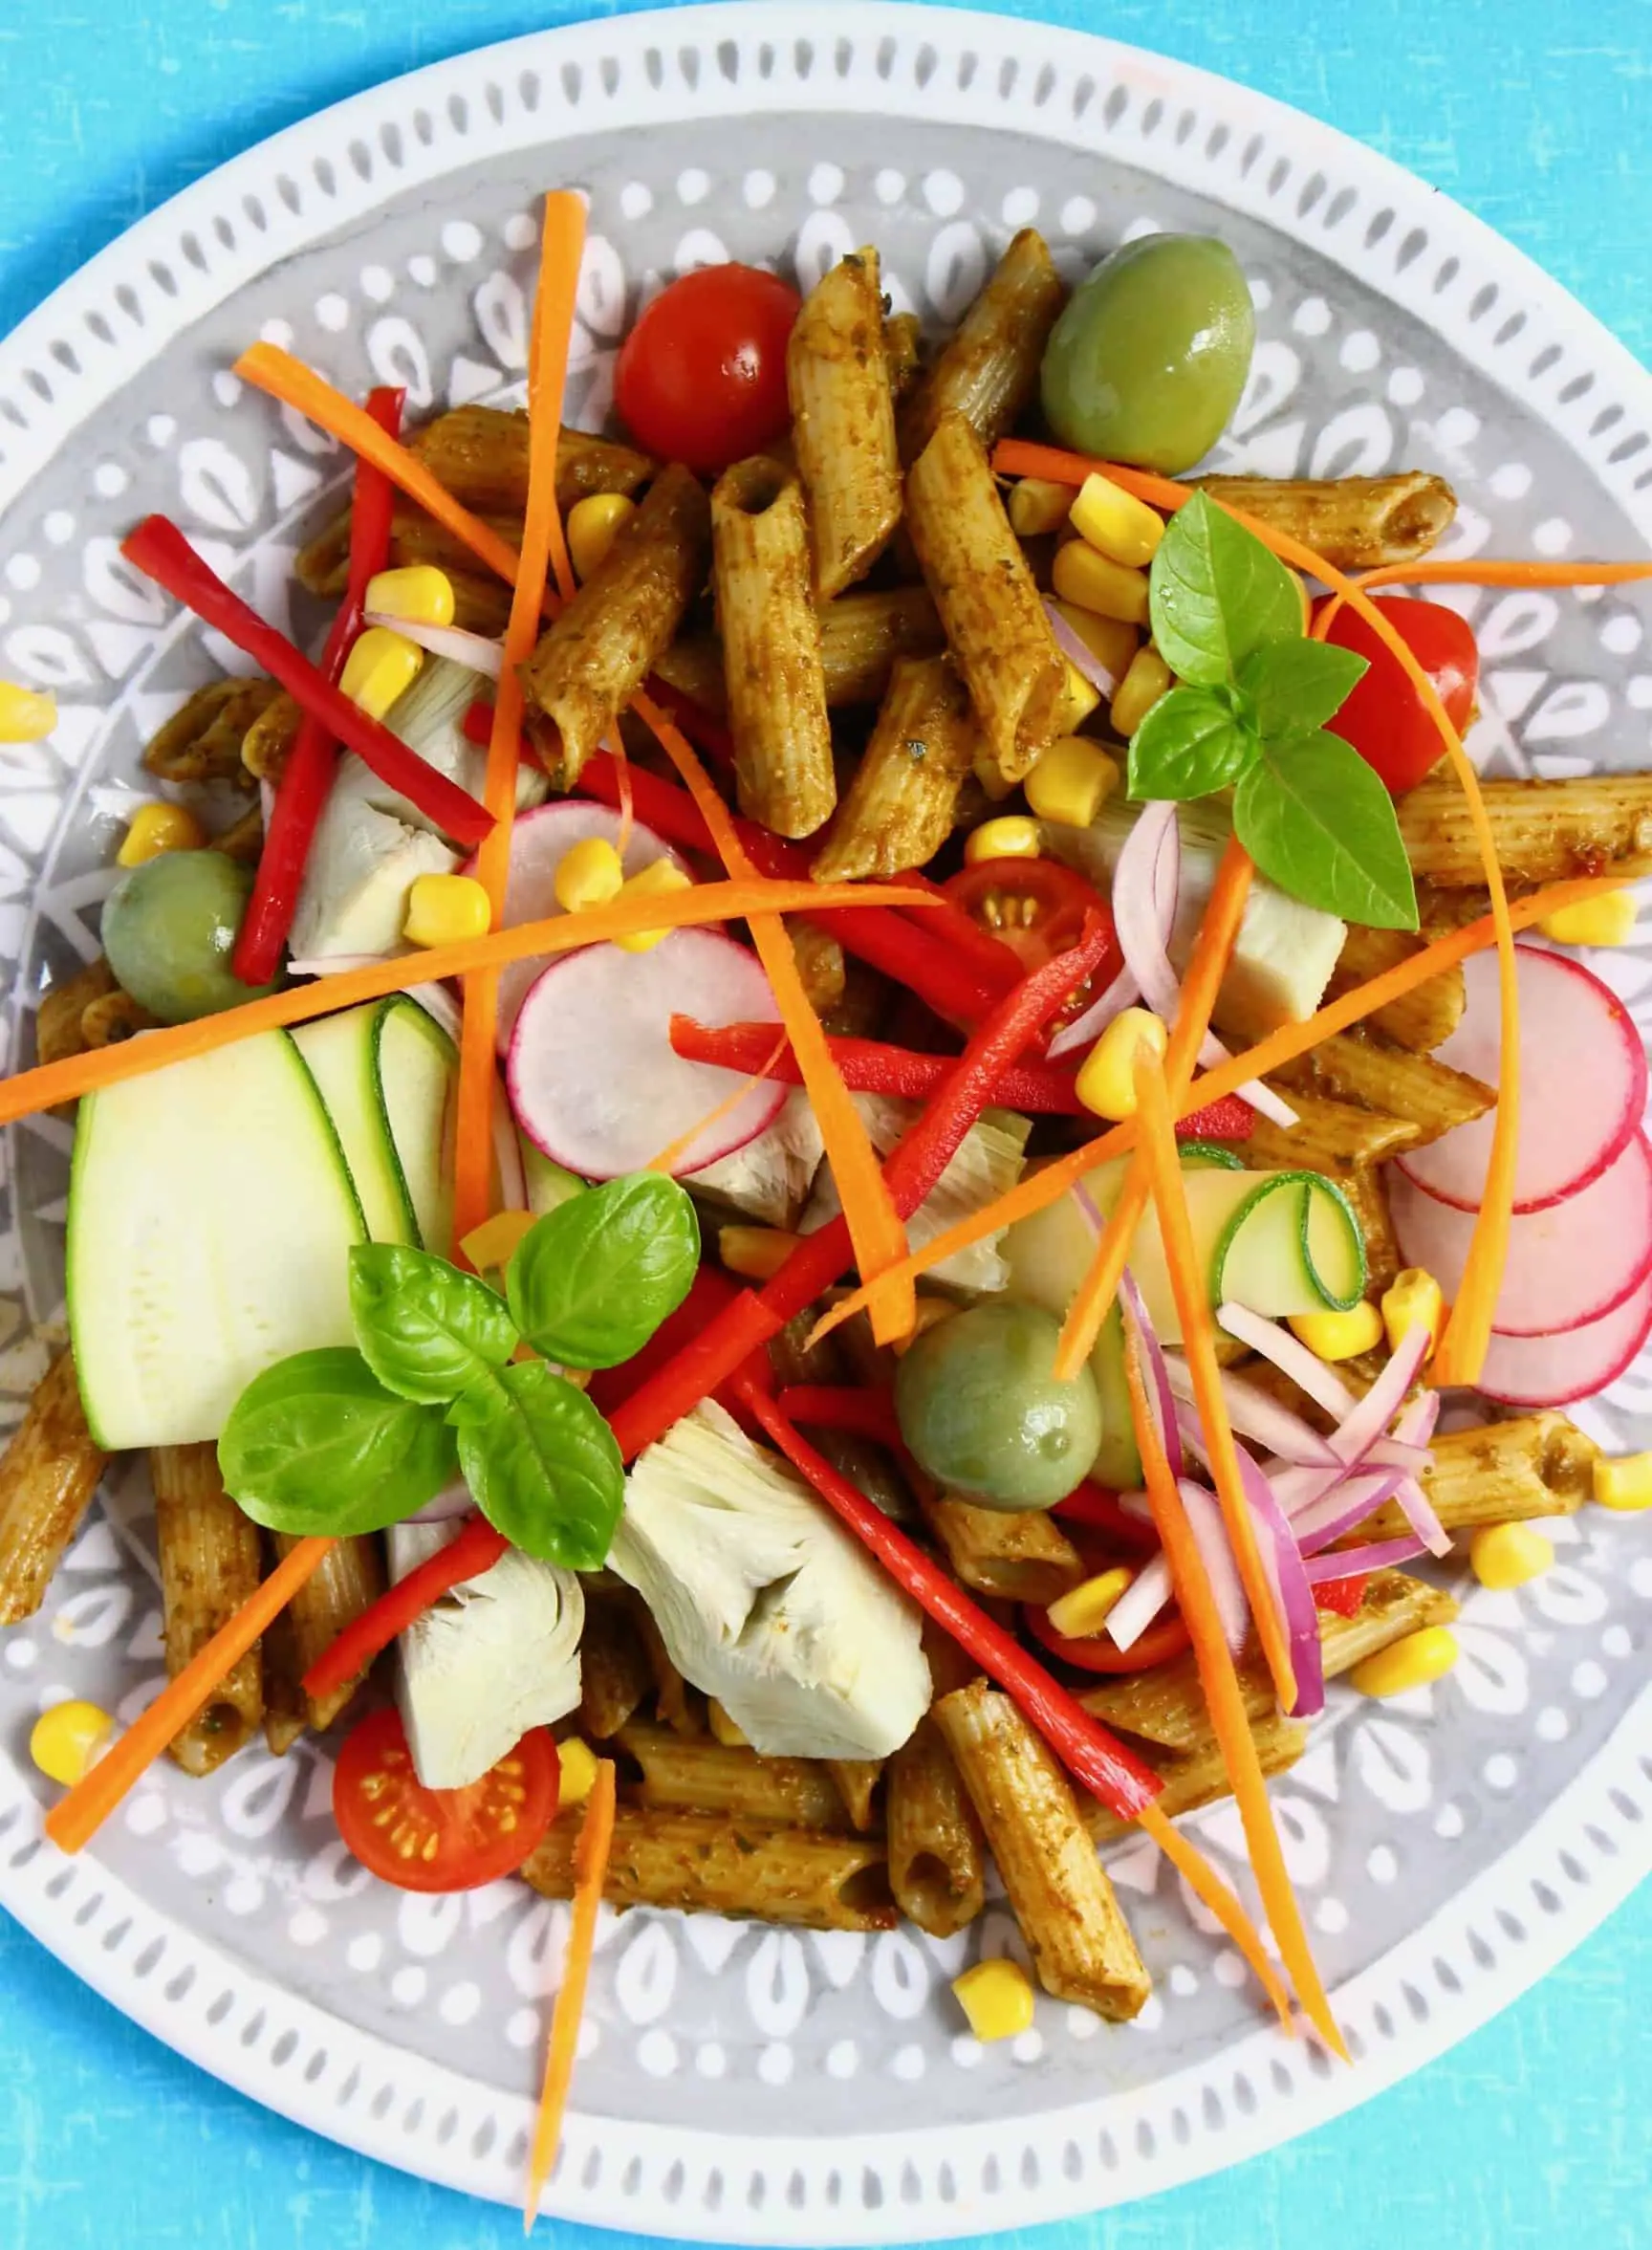 Penne pasta with sundried tomato pesto salad and vegetables on a grey plate